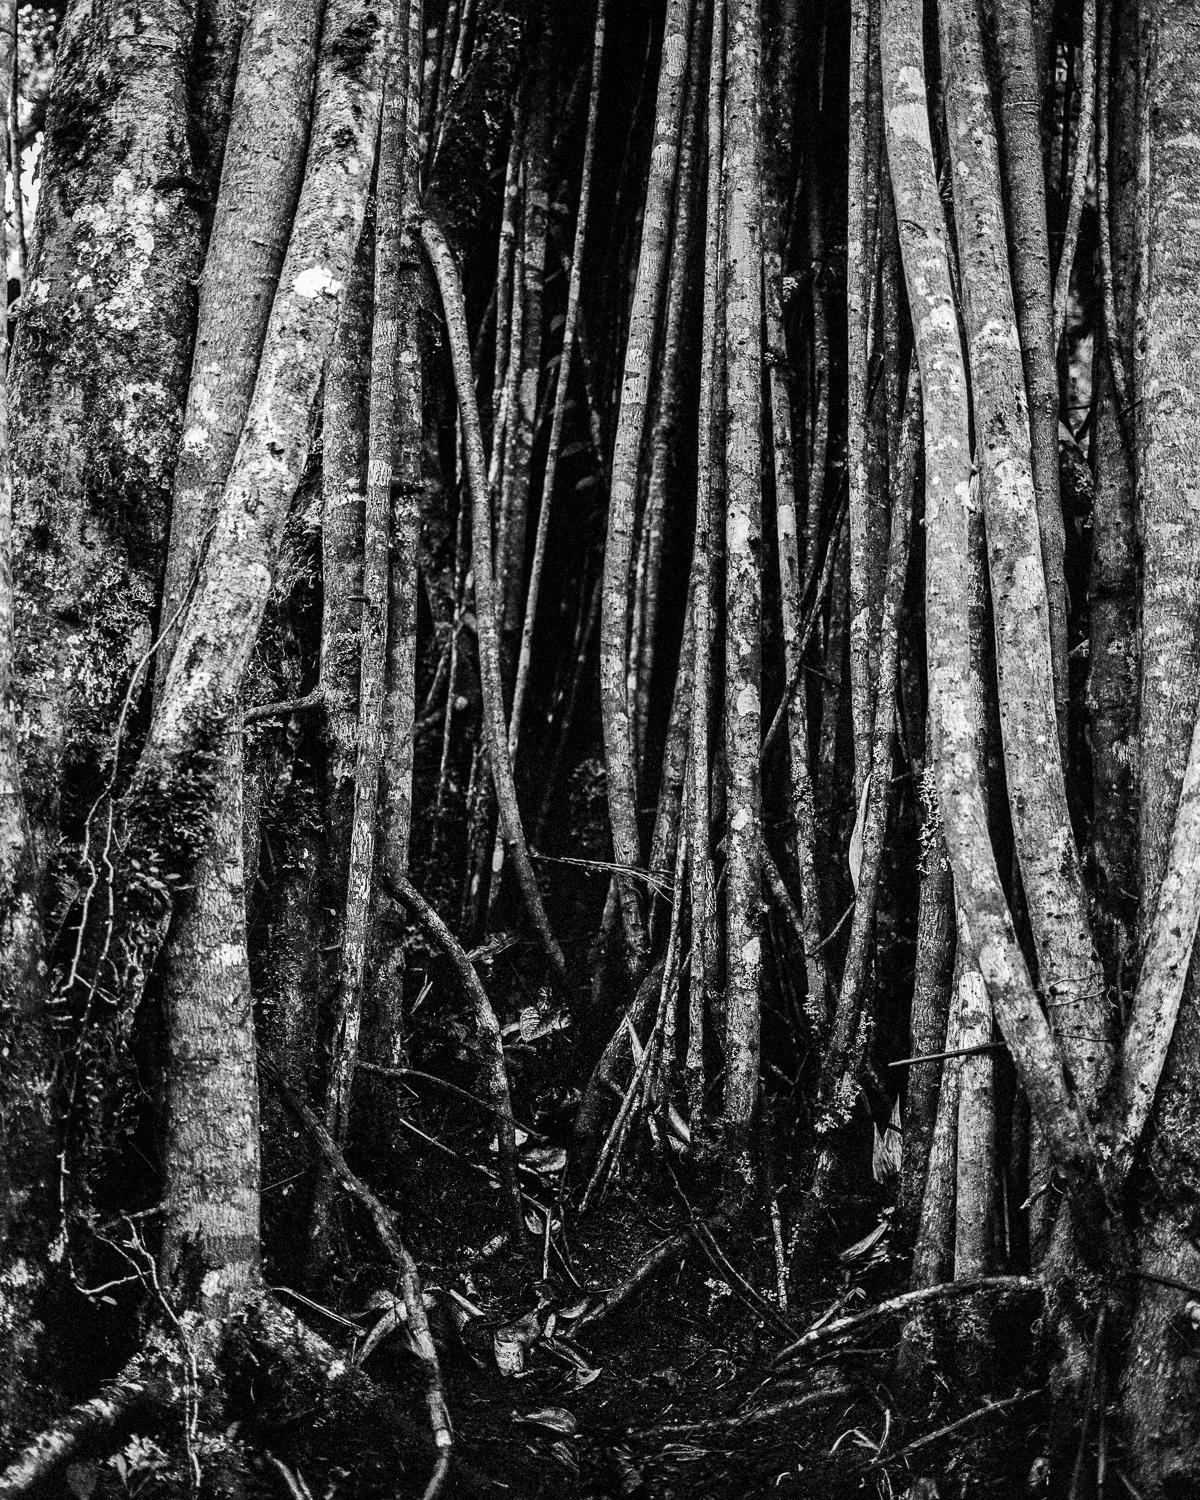 Black and White Photograph Miguel Winograd  - Races Selva Oscura, estampes pigmentaires